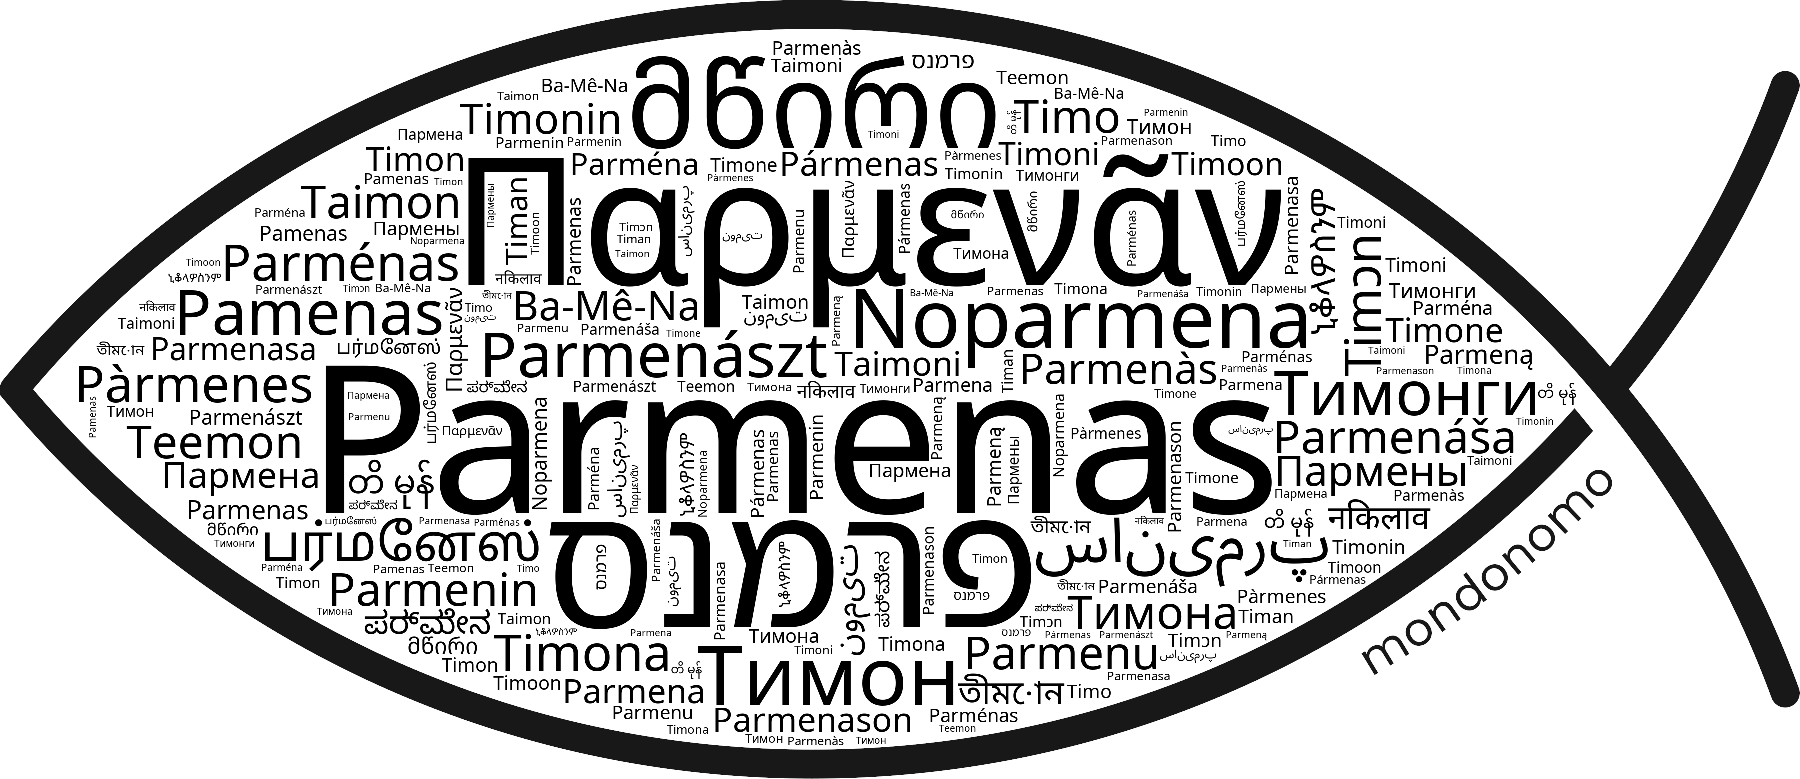 Name Parmenas in the world's Bibles